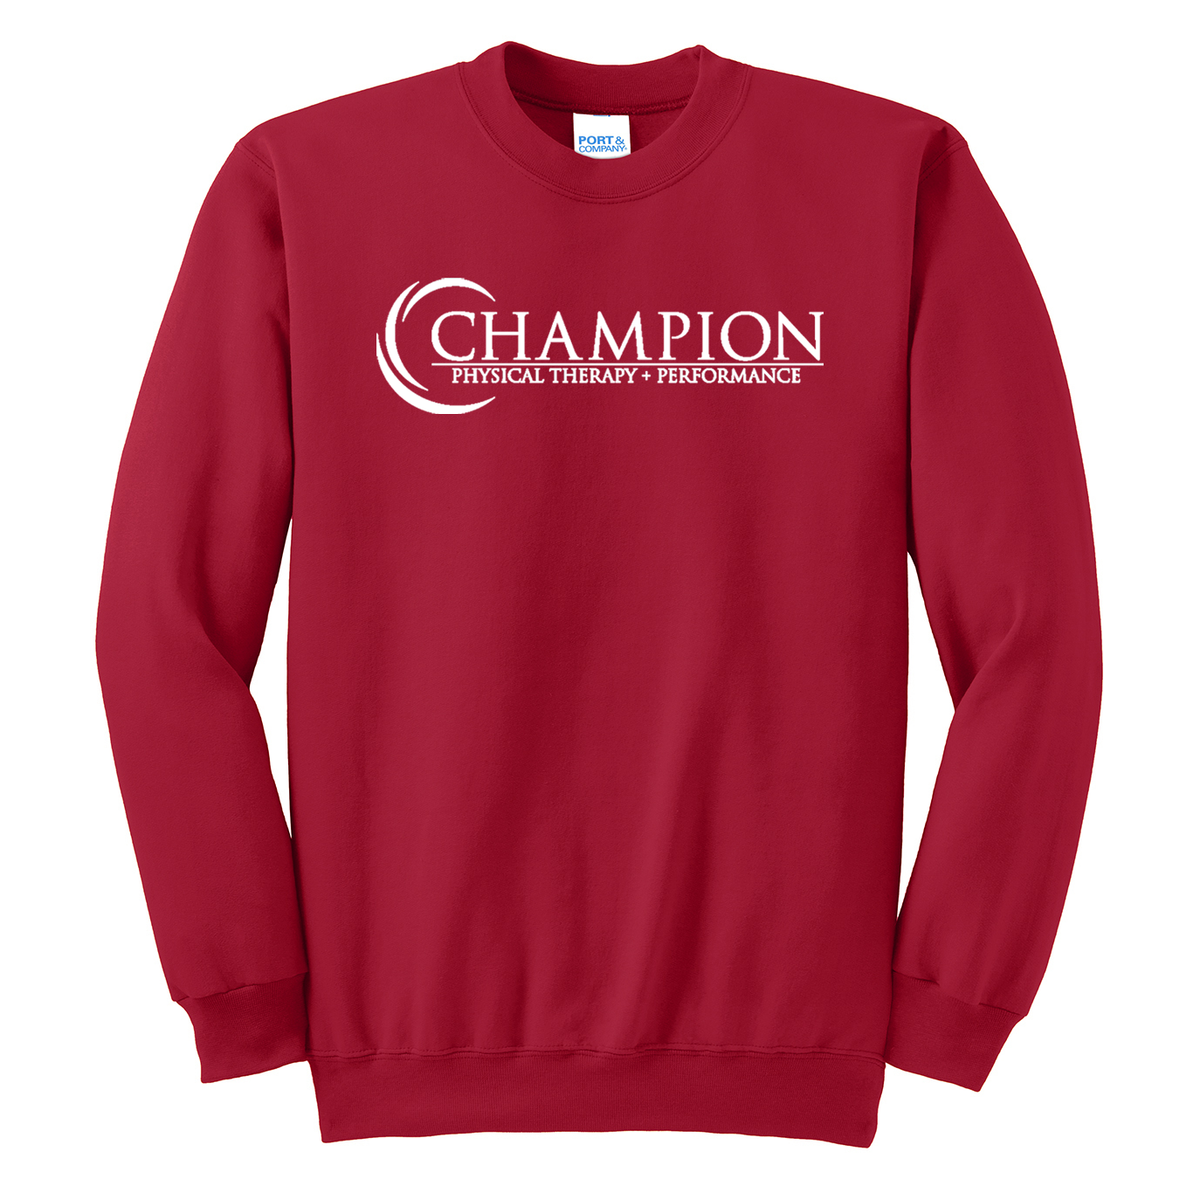 Champion Physical Therapy Crew Neck Sweater